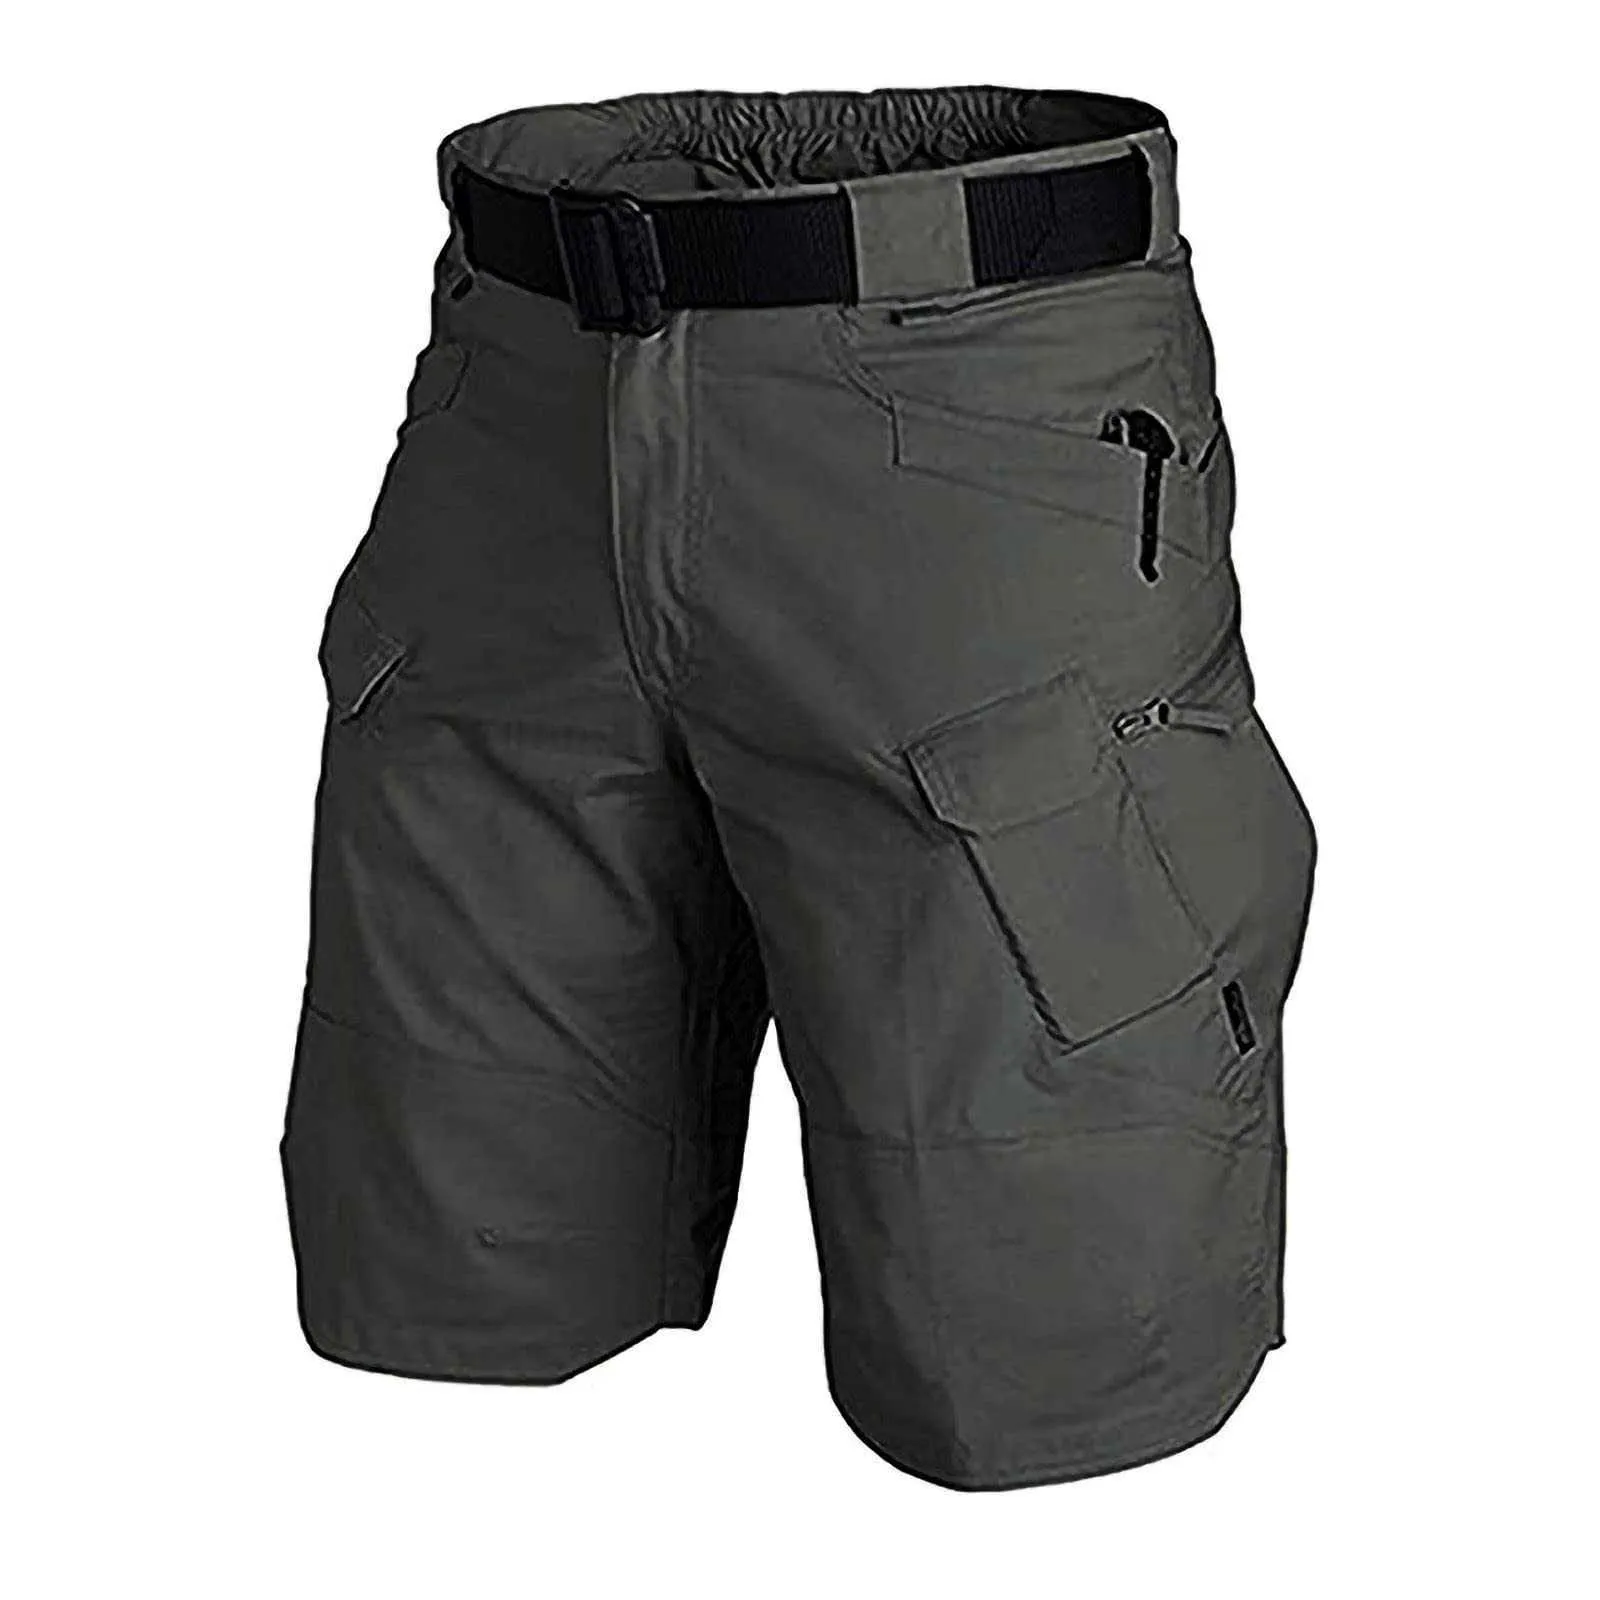 Military Tactical Tactical Shorts Mens Solid Colors Cargo Shirts For  Outdoor Casual Wear, Hunting, Fishing, And Workwear Plus Size Available  Z0404 From Mauch, $17.37